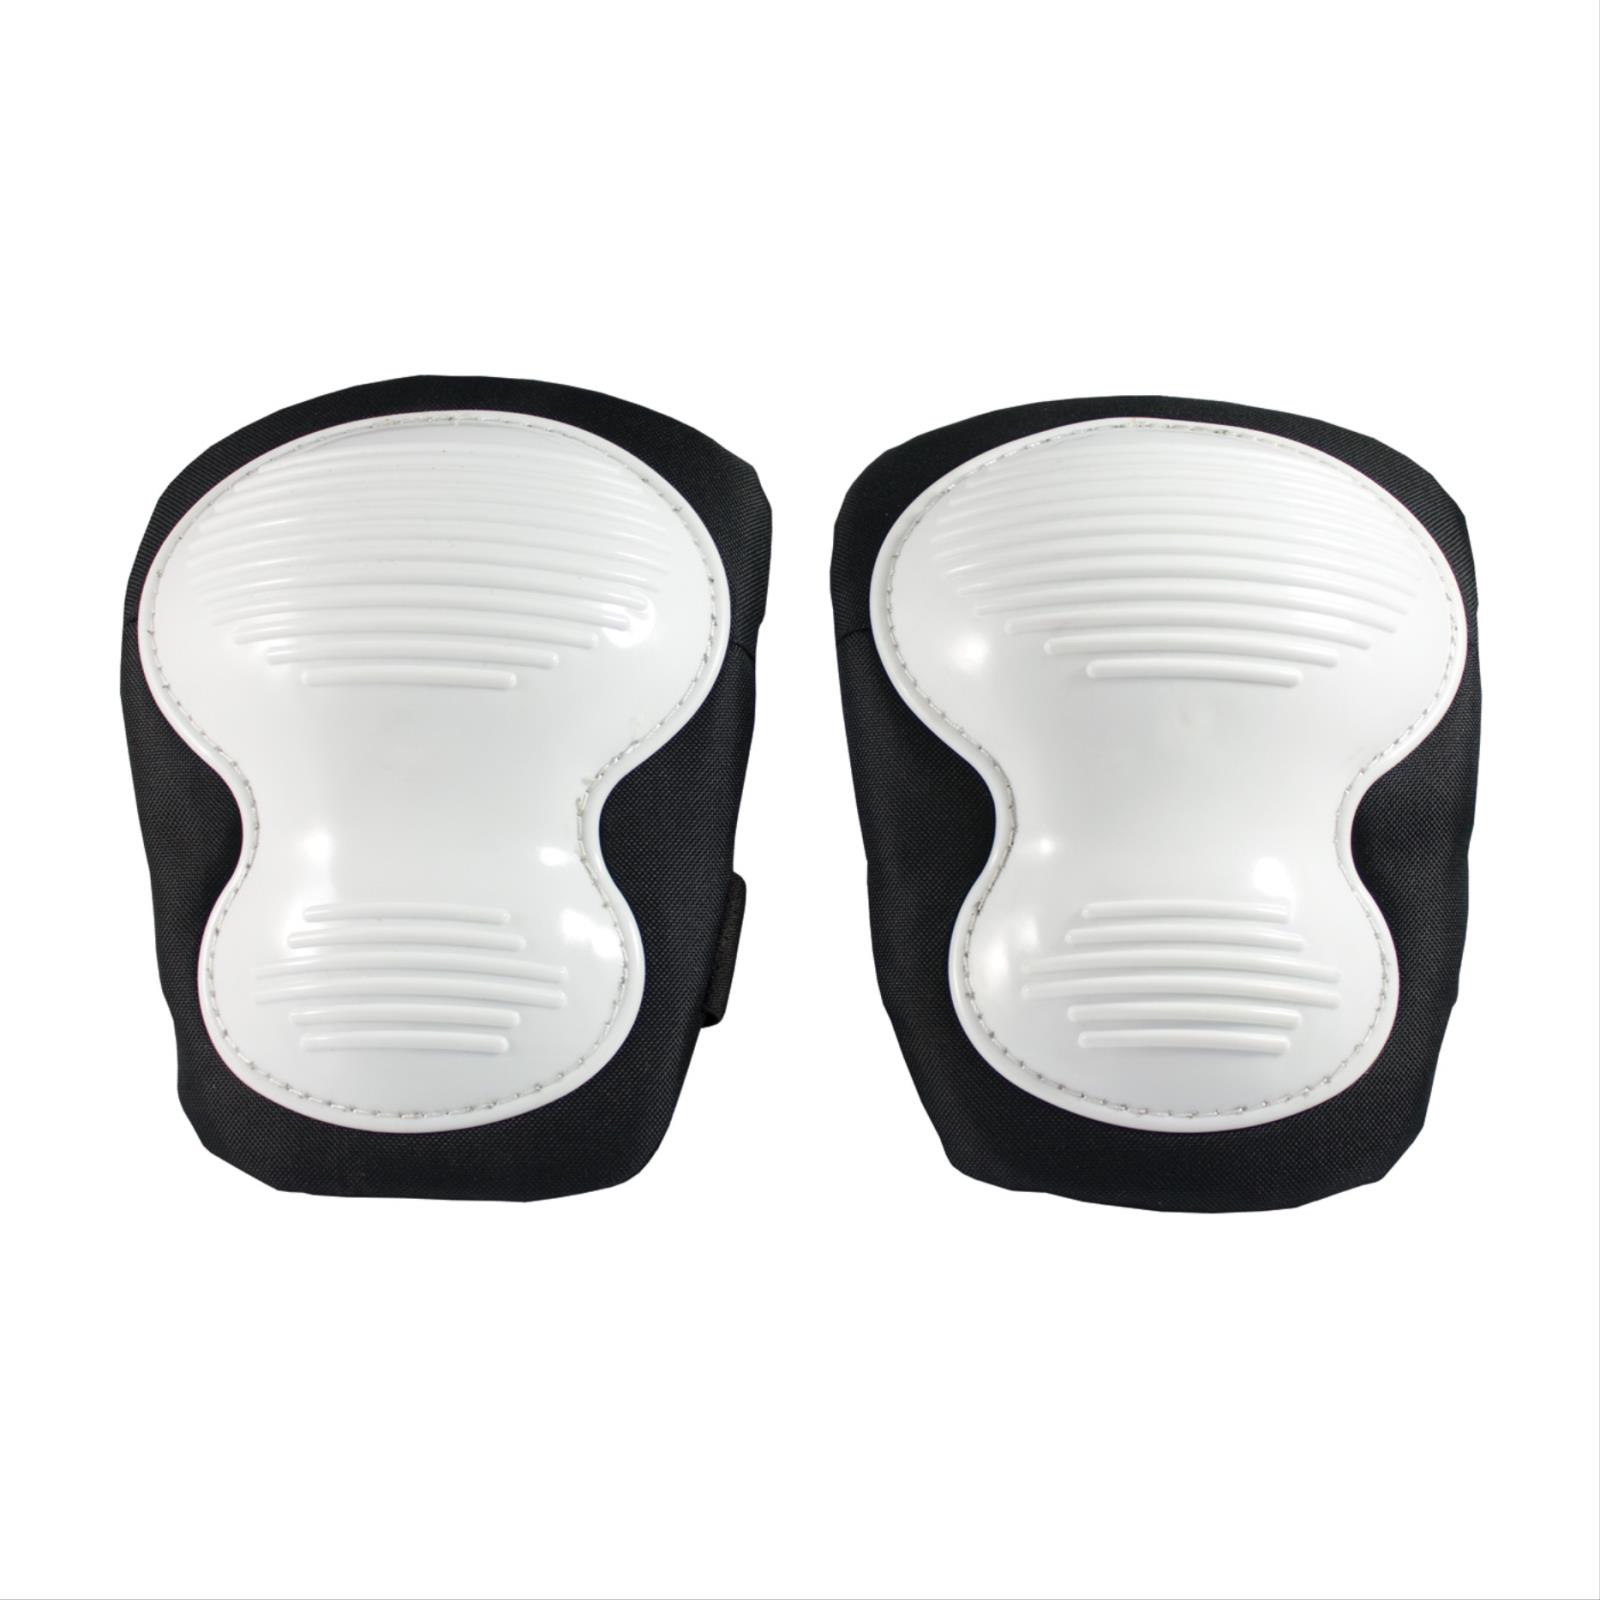 Non-Marring Knee Pads